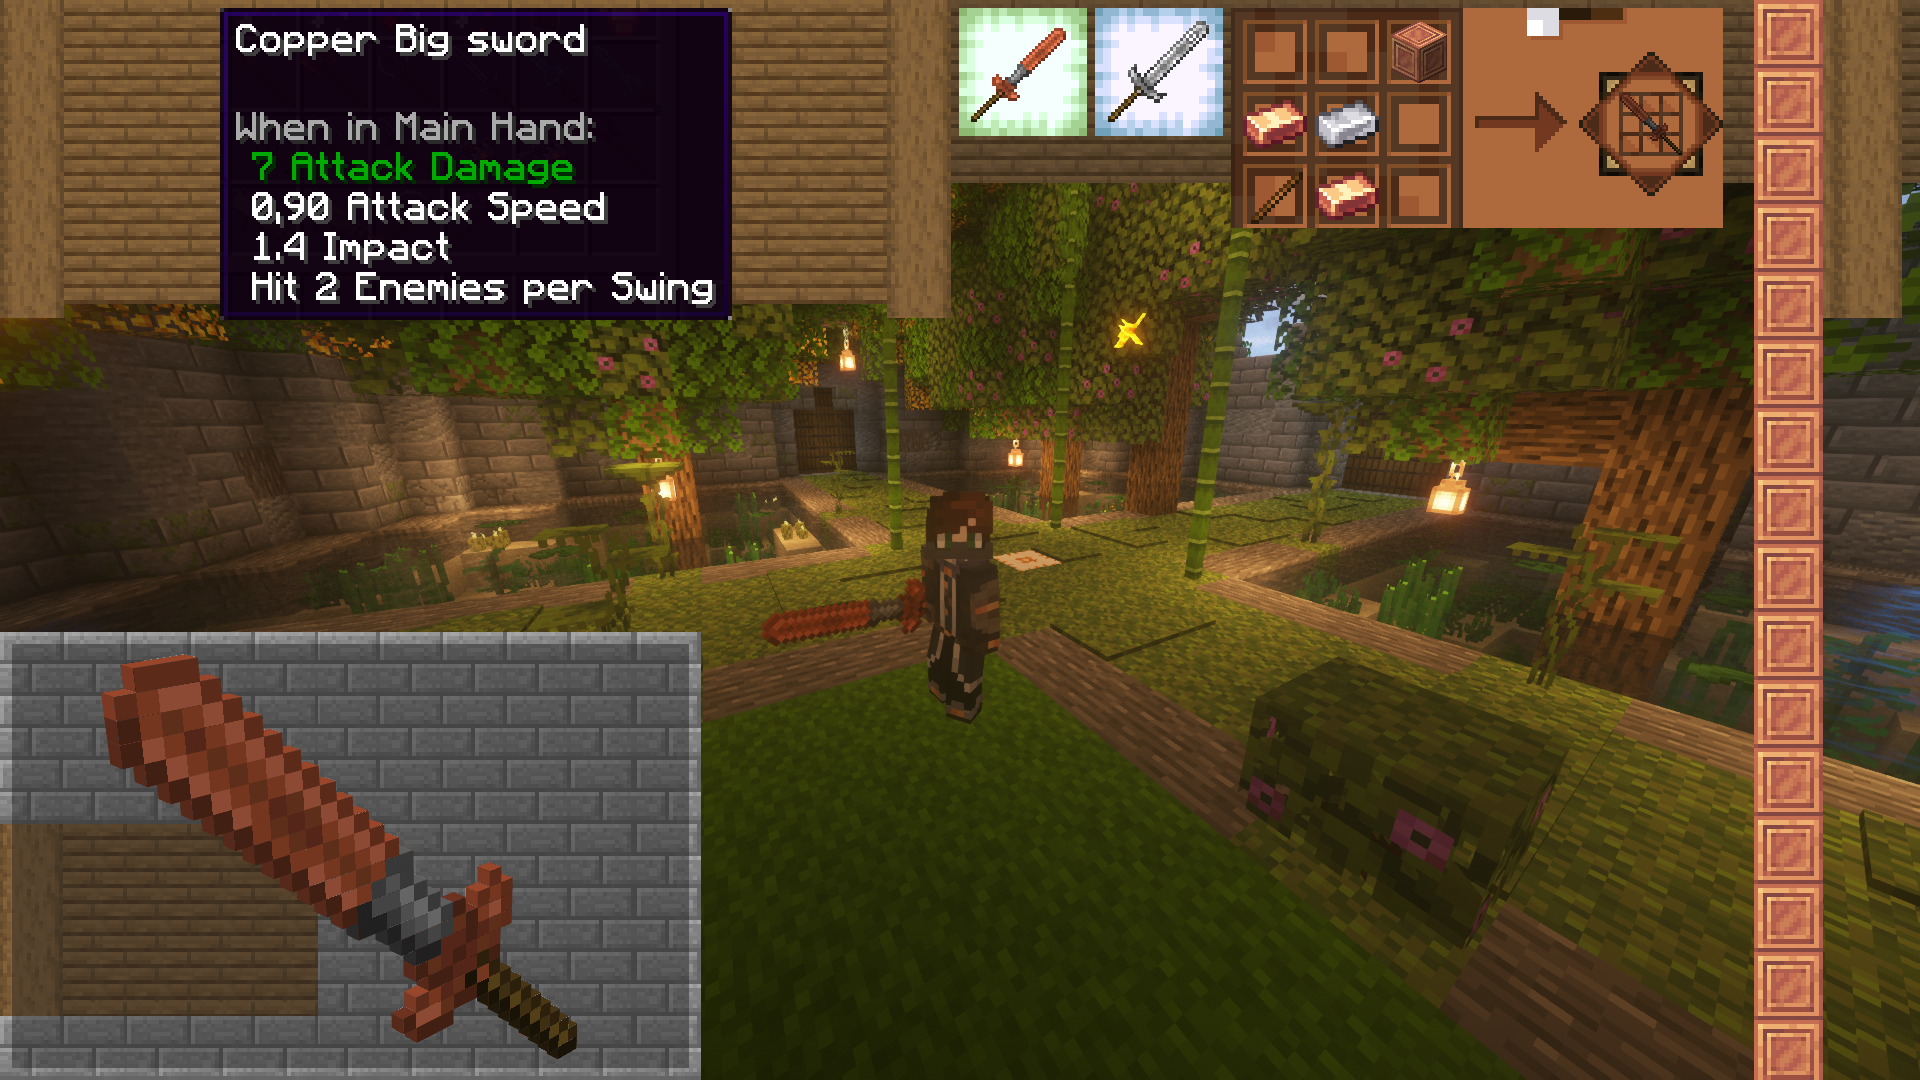 RPG style More Weapons! - Mods - Minecraft - CurseForge